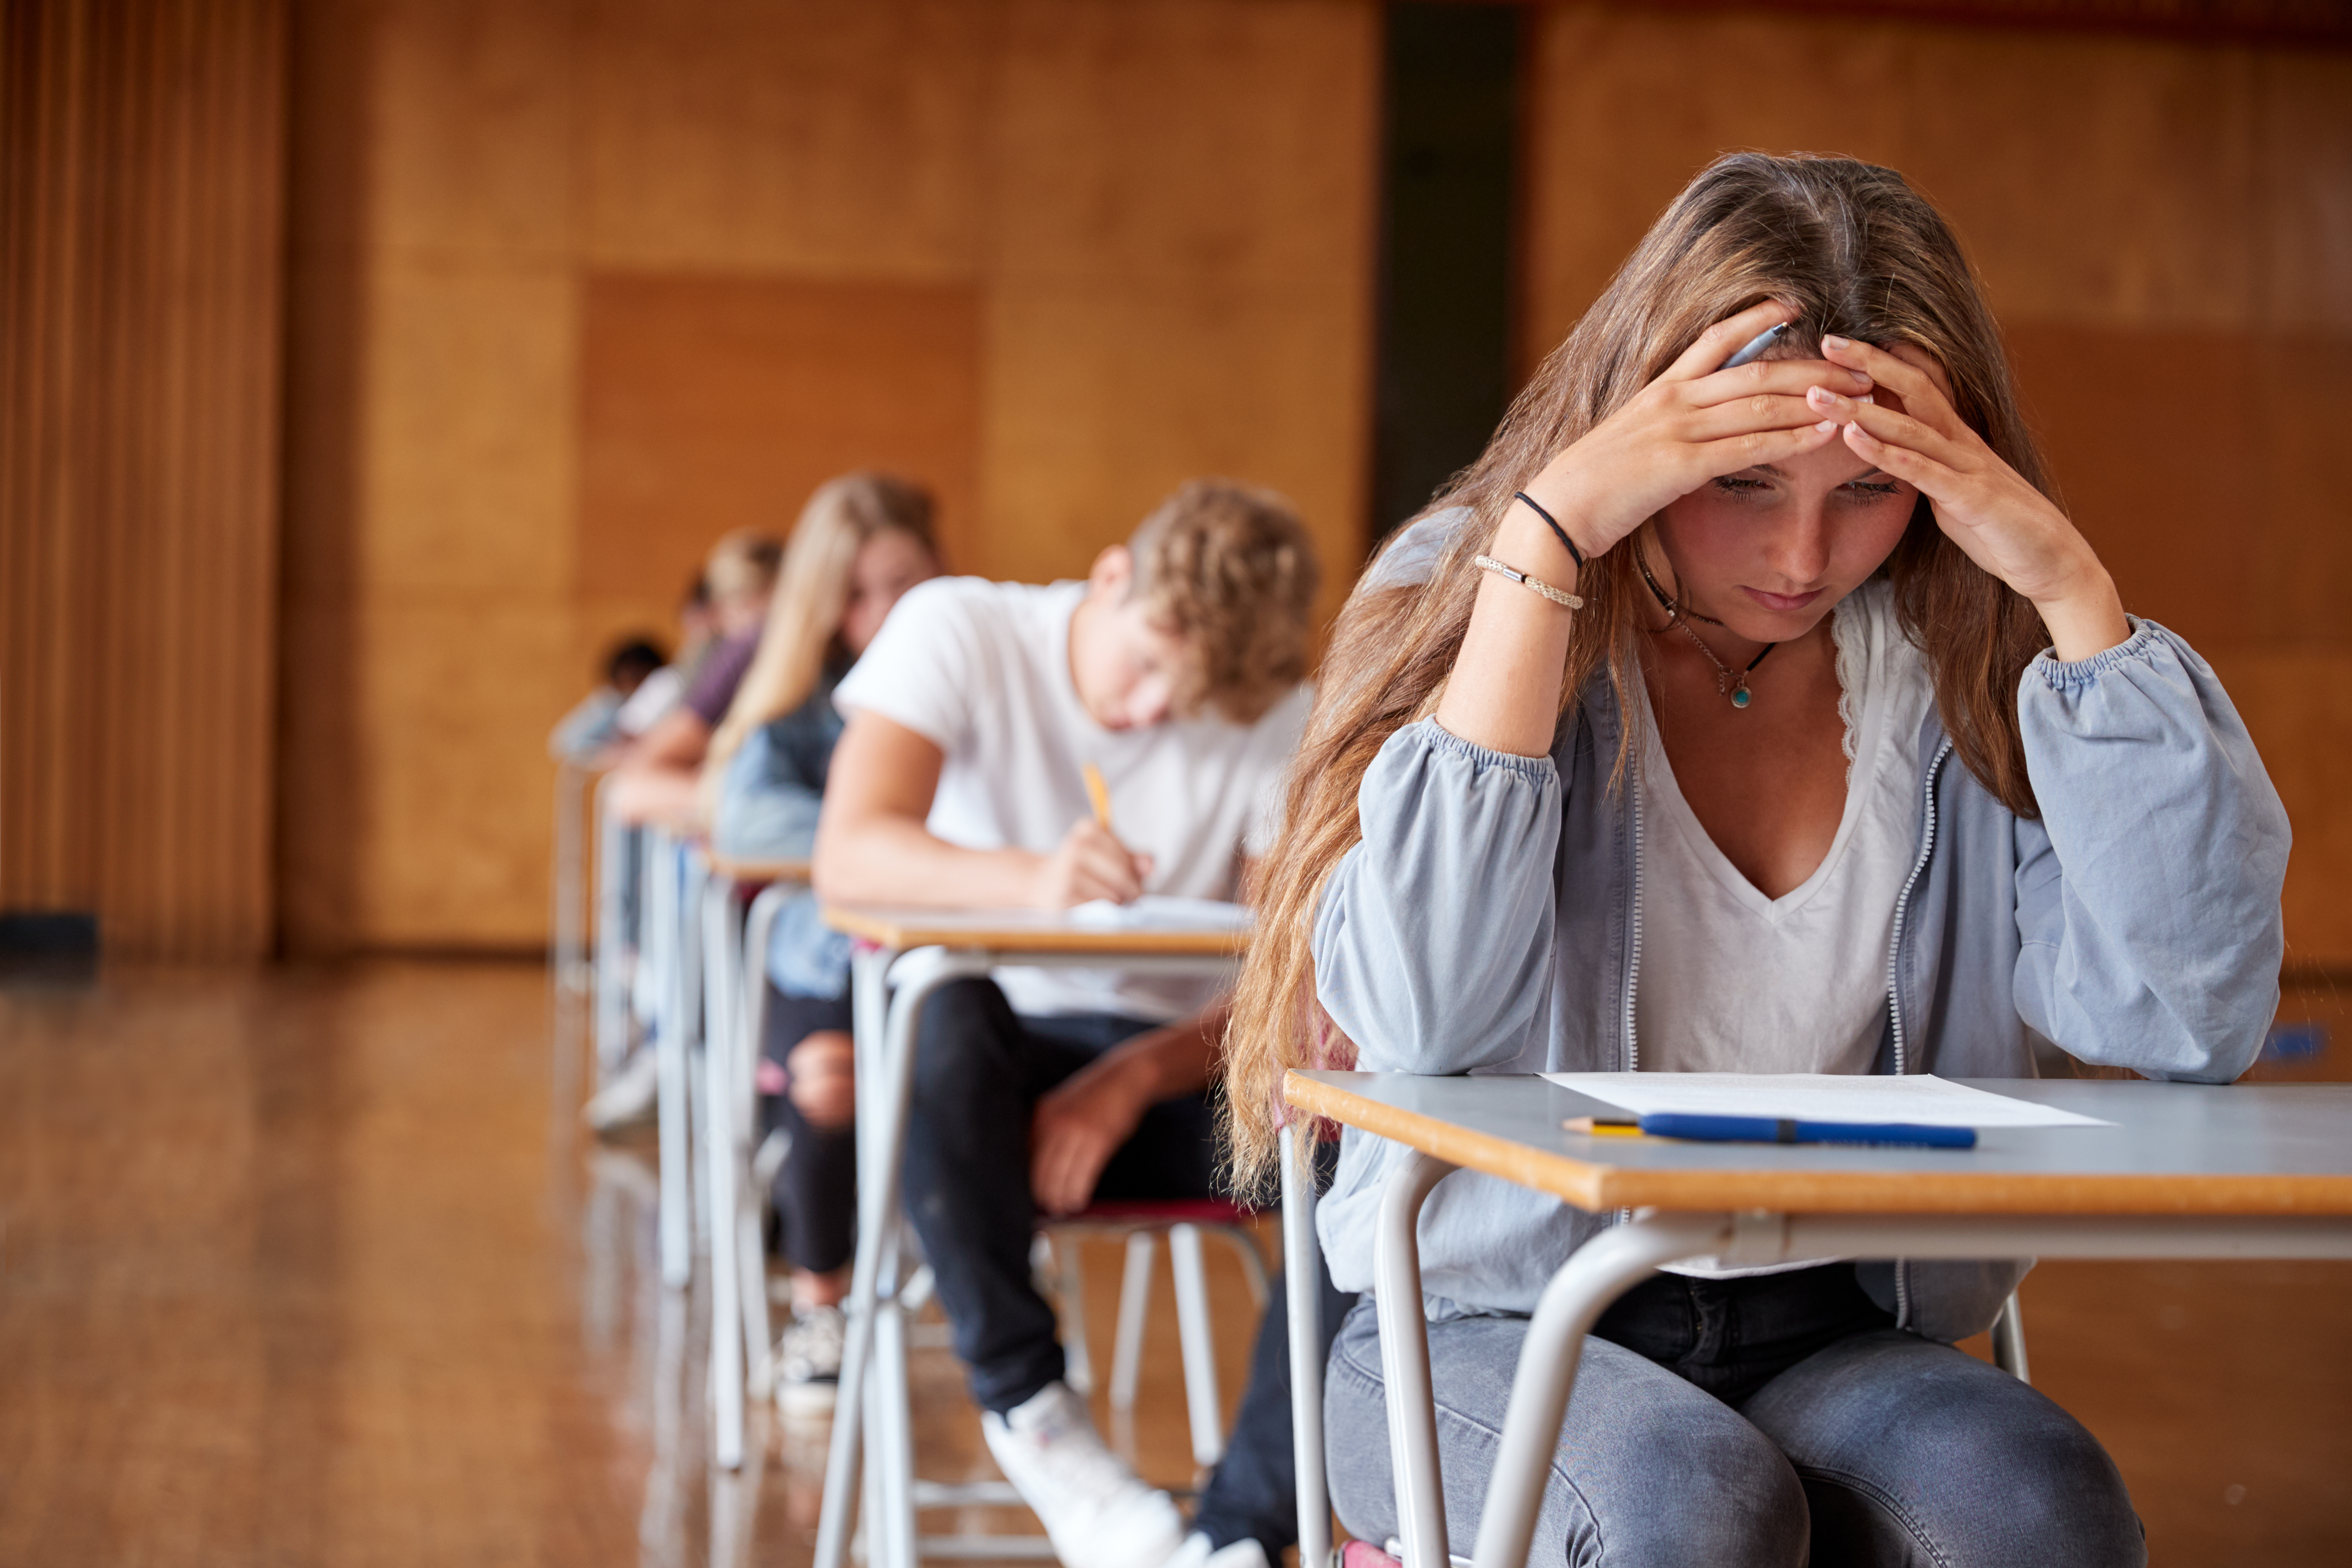 Students taking a test | Source: Shutterstock